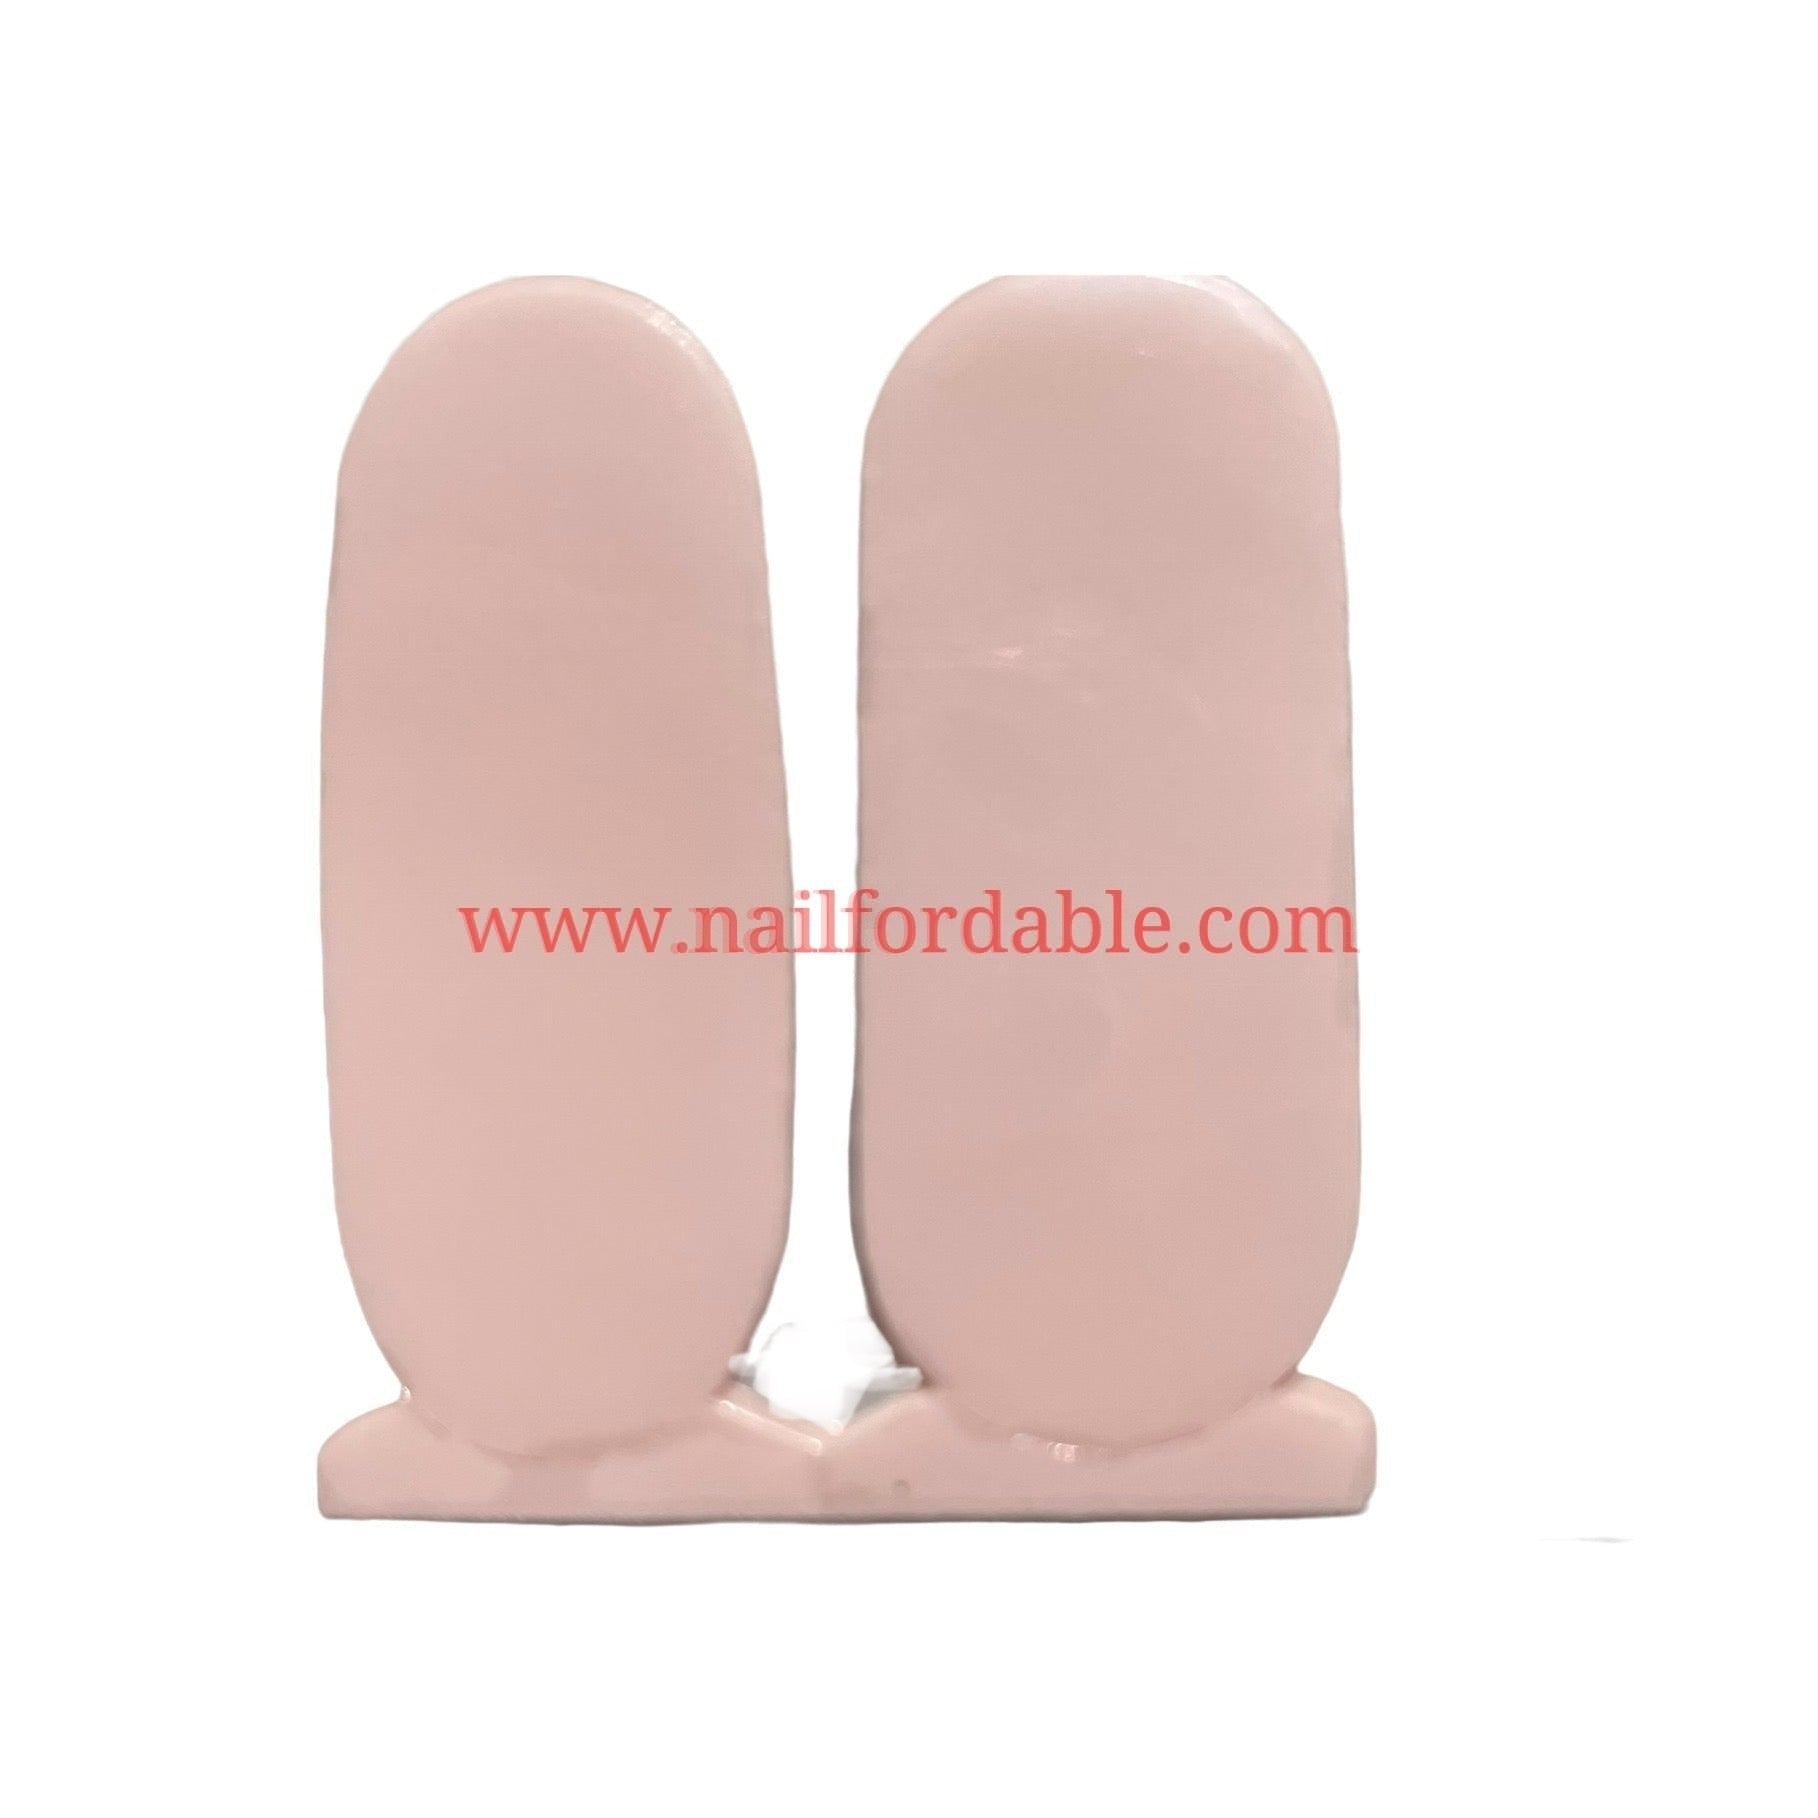 Pink solid Accents Nail Wraps | Semi Cured Gel Wraps | Gel Nail Wraps |Nail Polish | Nail Stickers